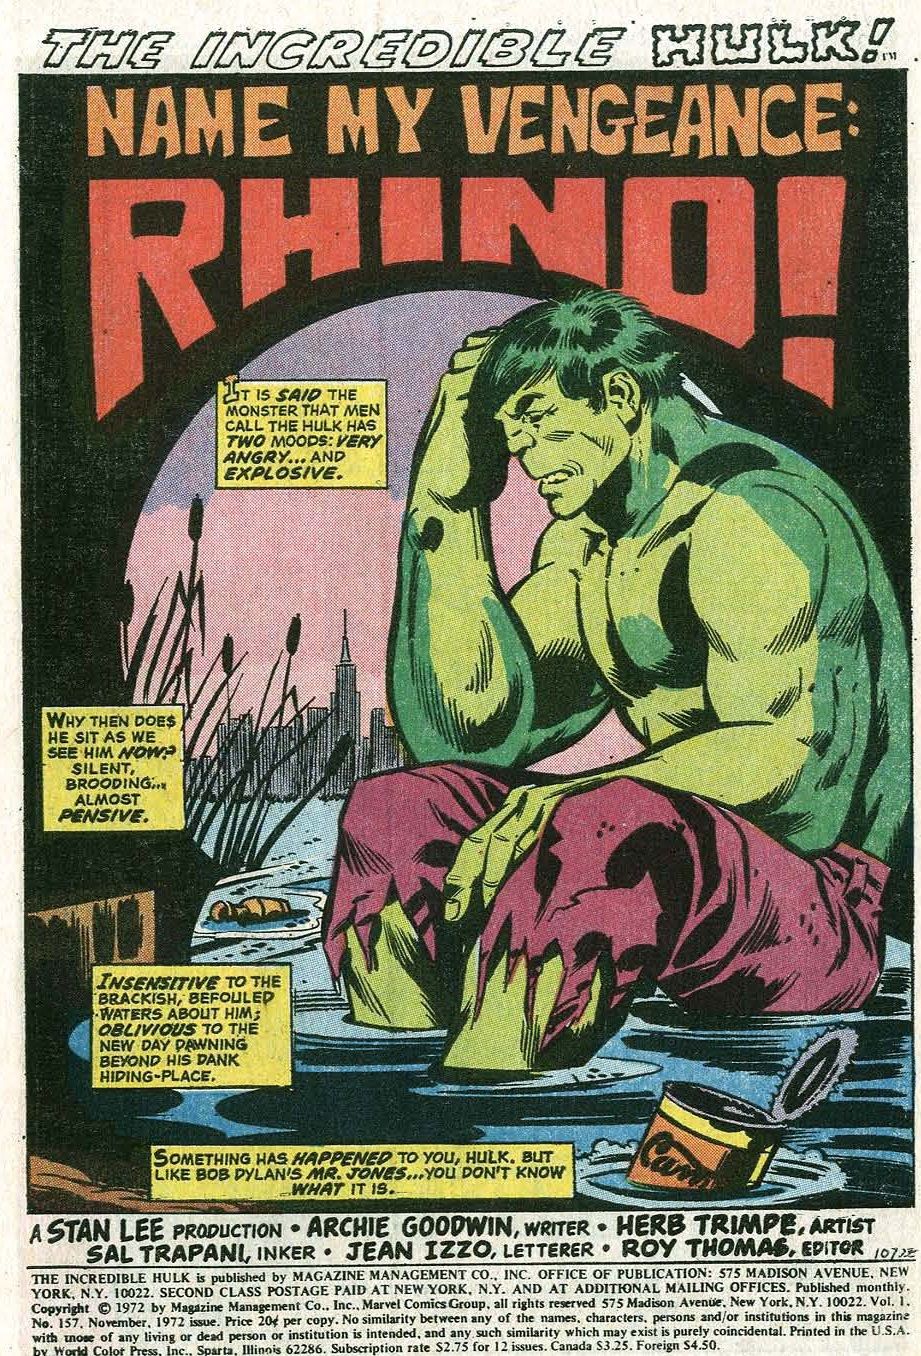 Bob Dylan is quoted in a Hulk caption